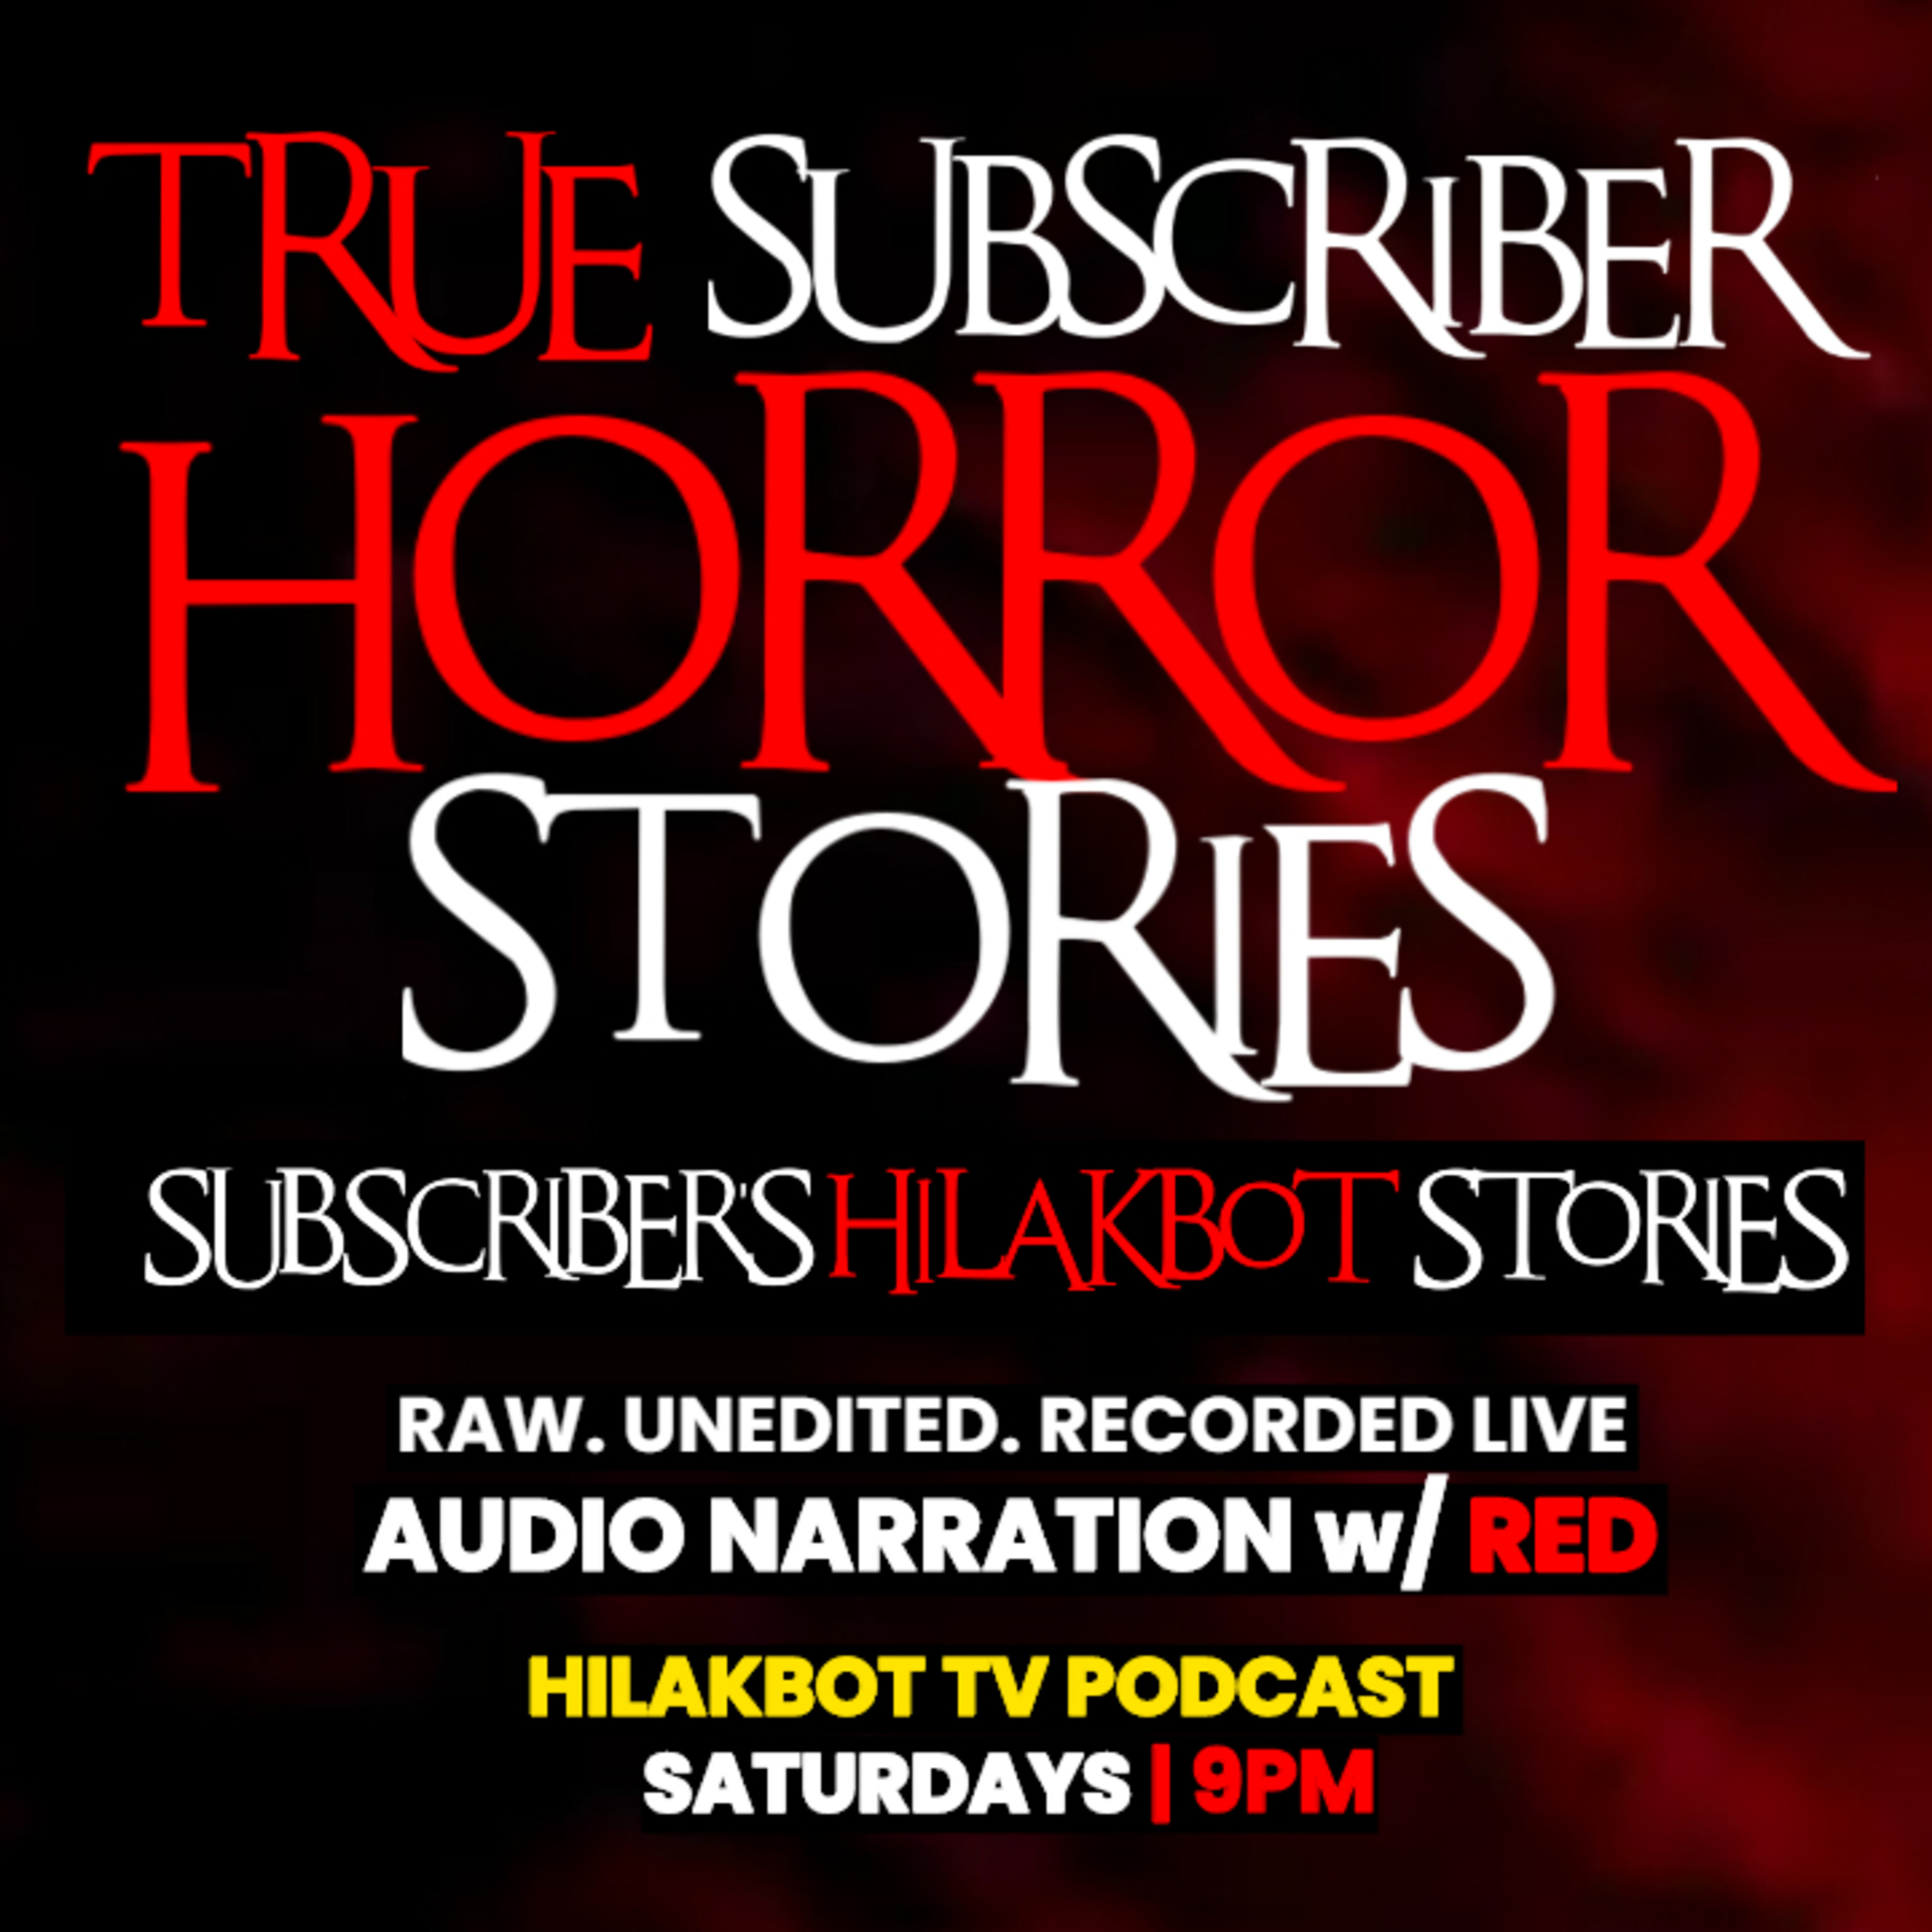 SUBSCRIBER'S HILAKBOT STORIES EPISODE 38 - Live Narration w/ RED | Listener's Submitted True Scary Stories